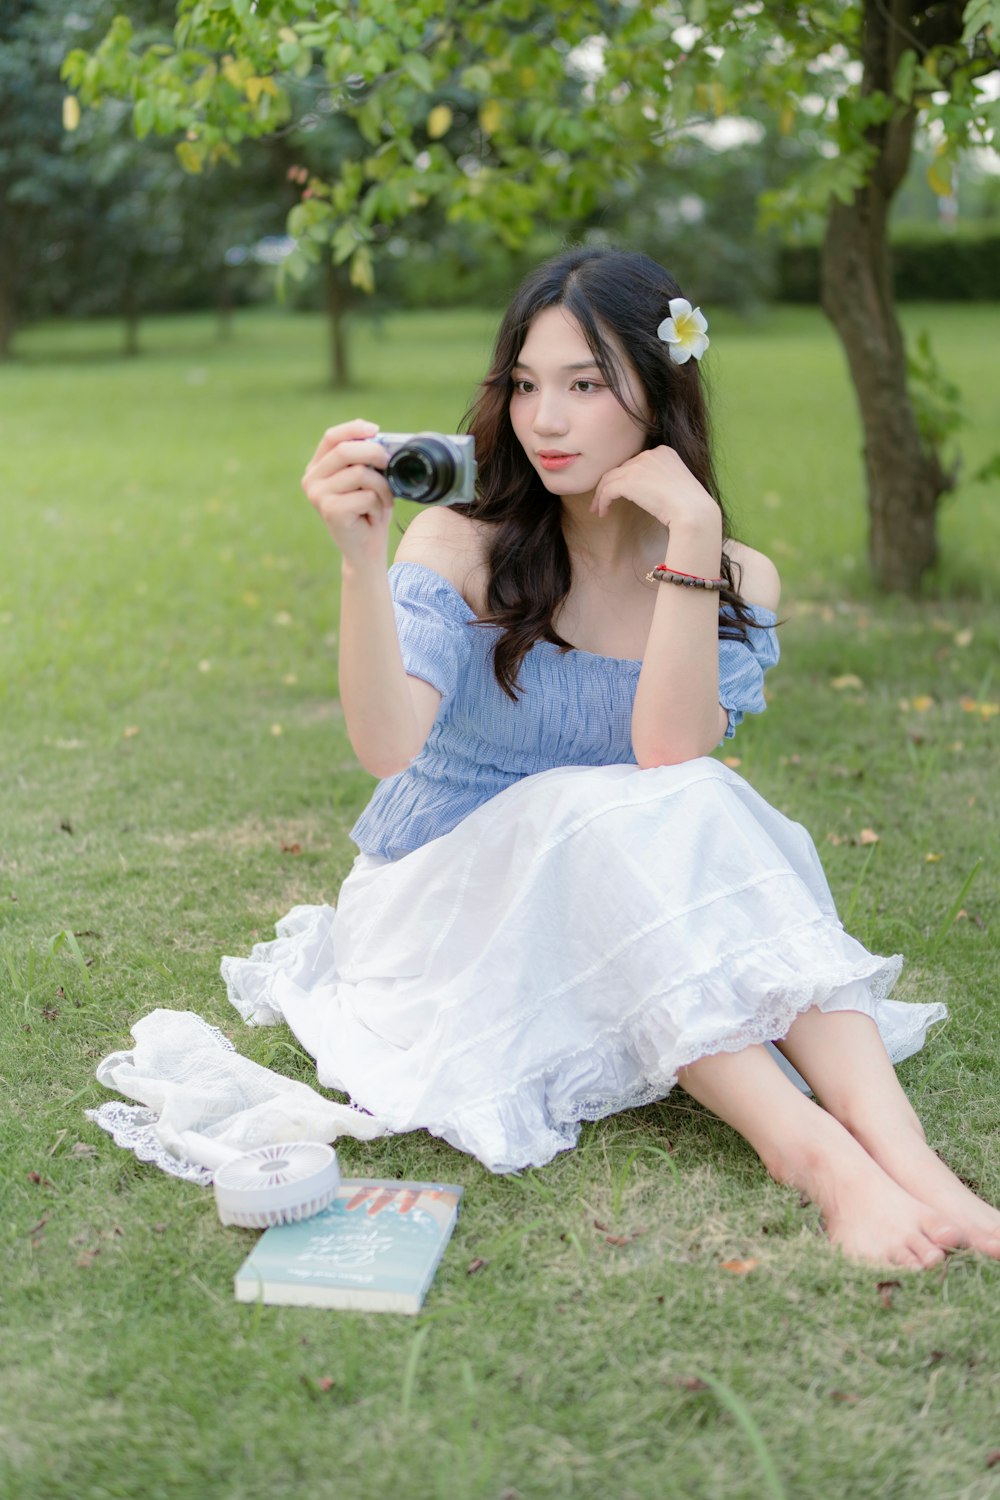 a woman sitting in the grass with a camera